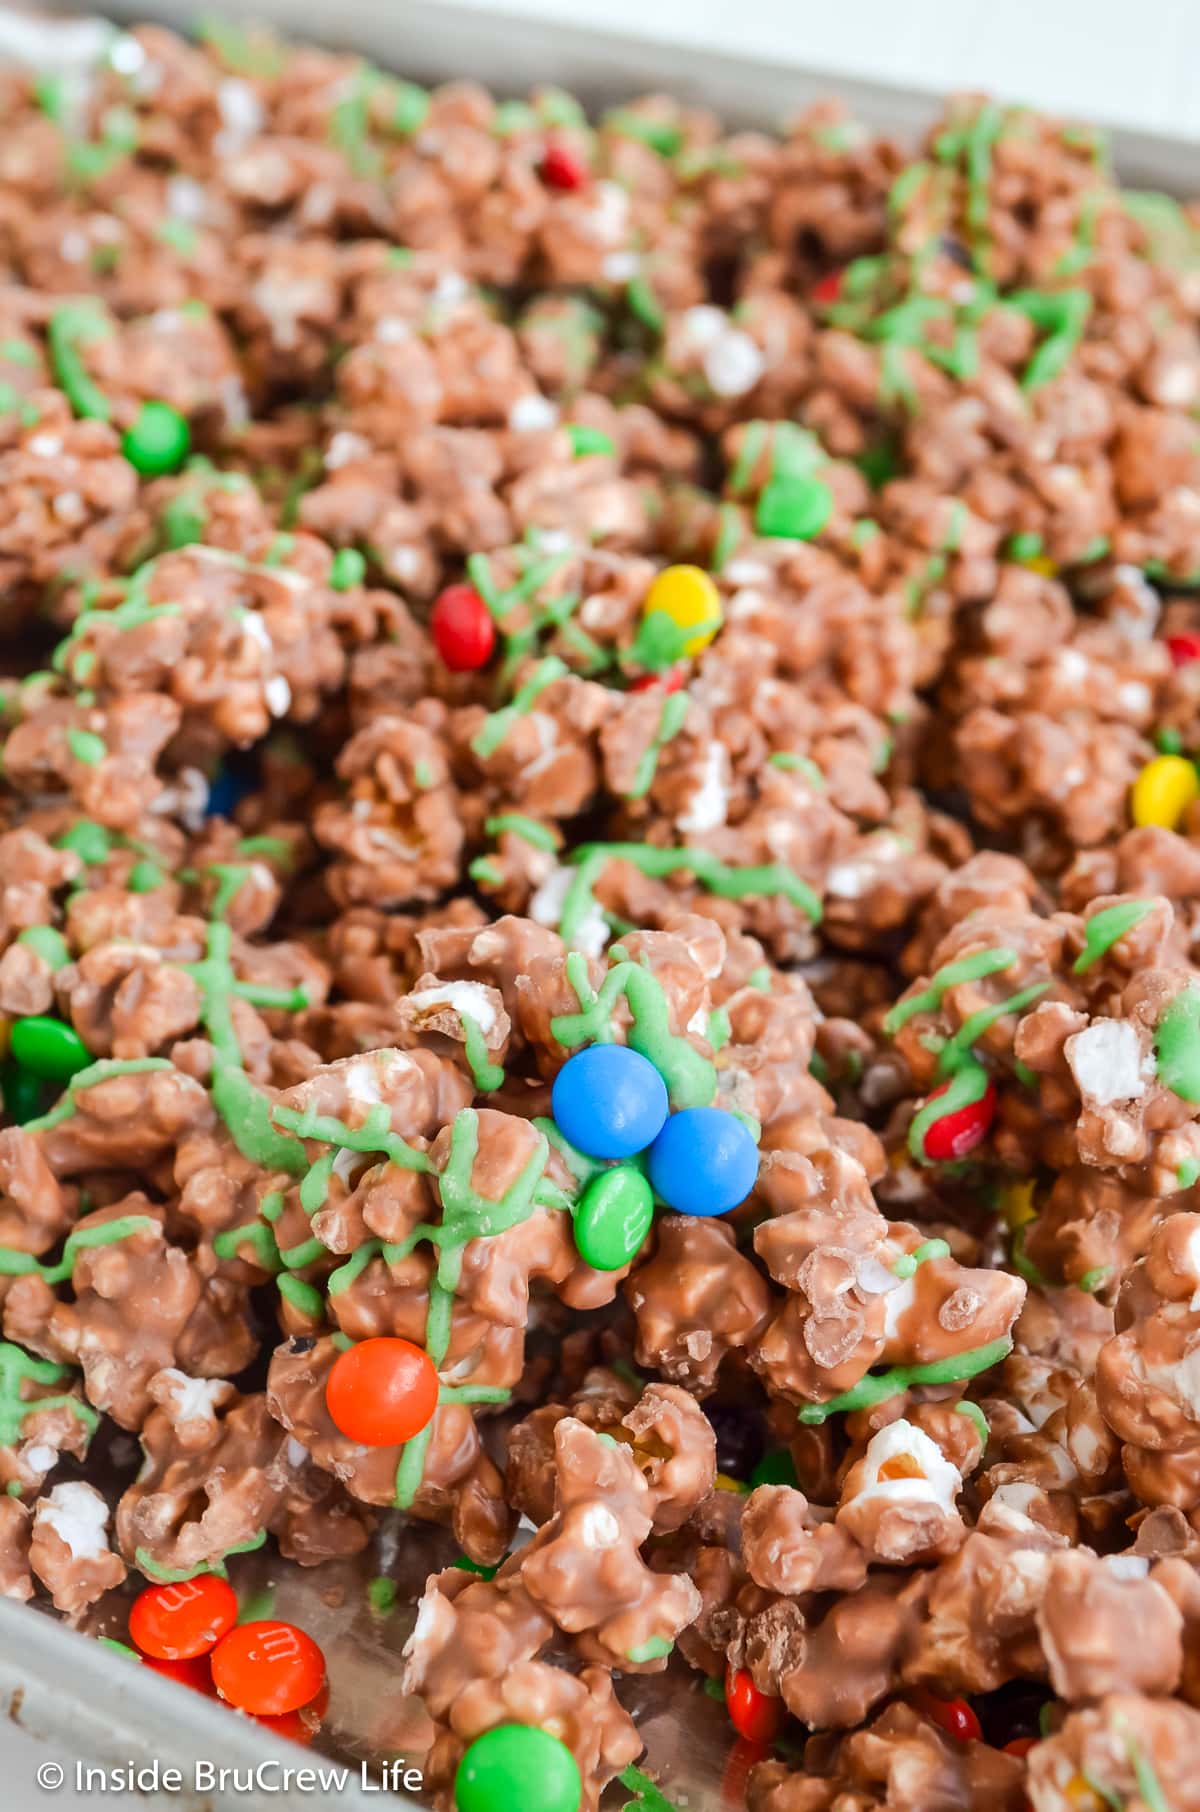 A tray filled with chocolate hazelnut popcorn and candy.